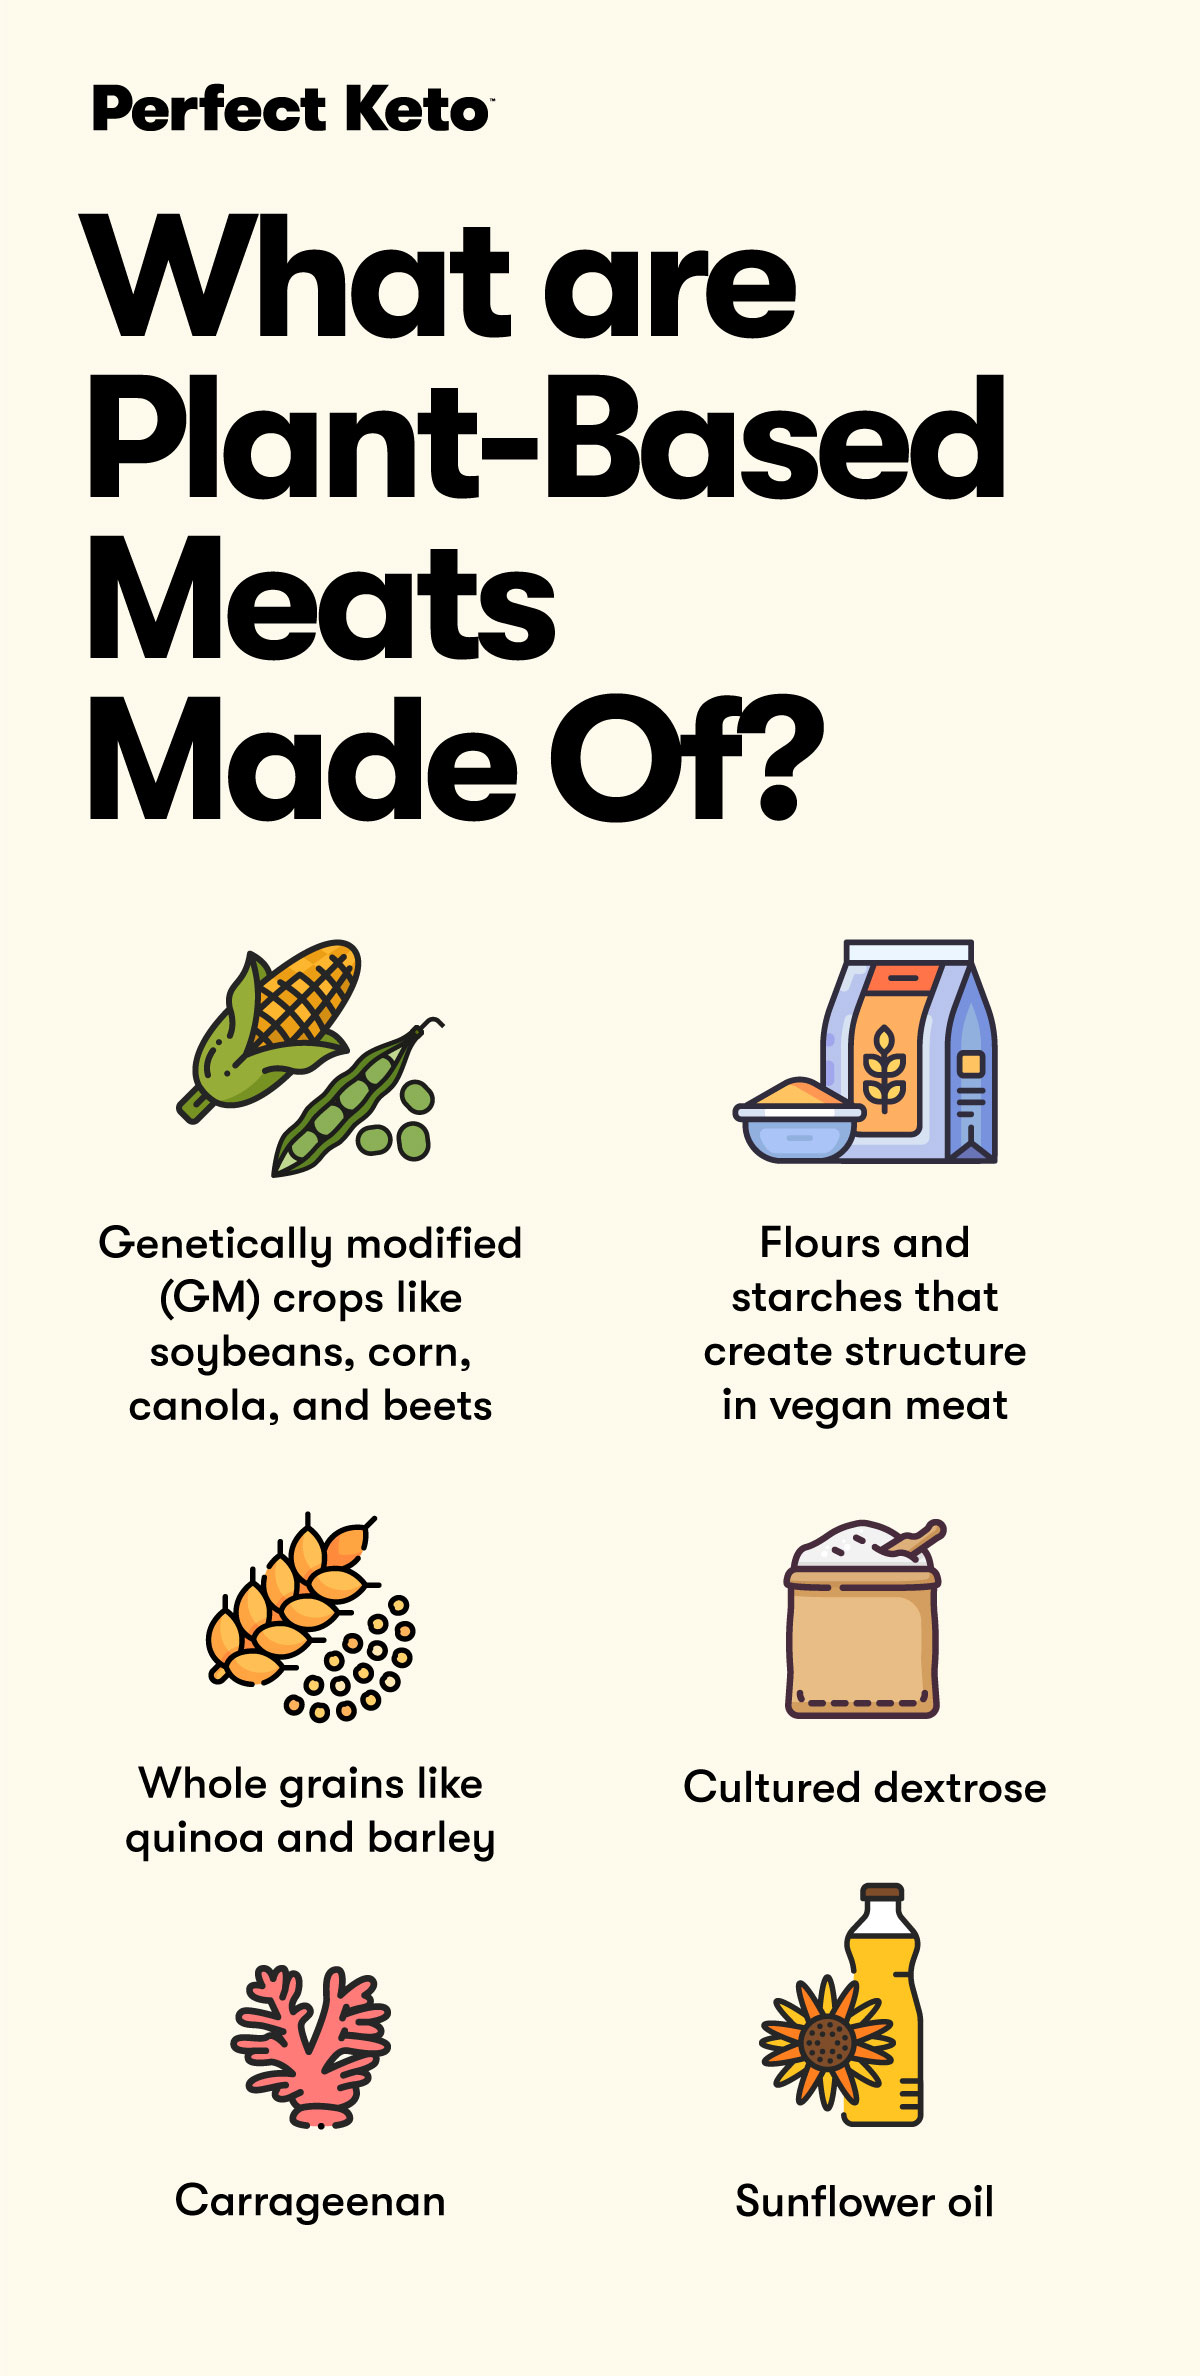 What are Plant-Based Meats Made Of?